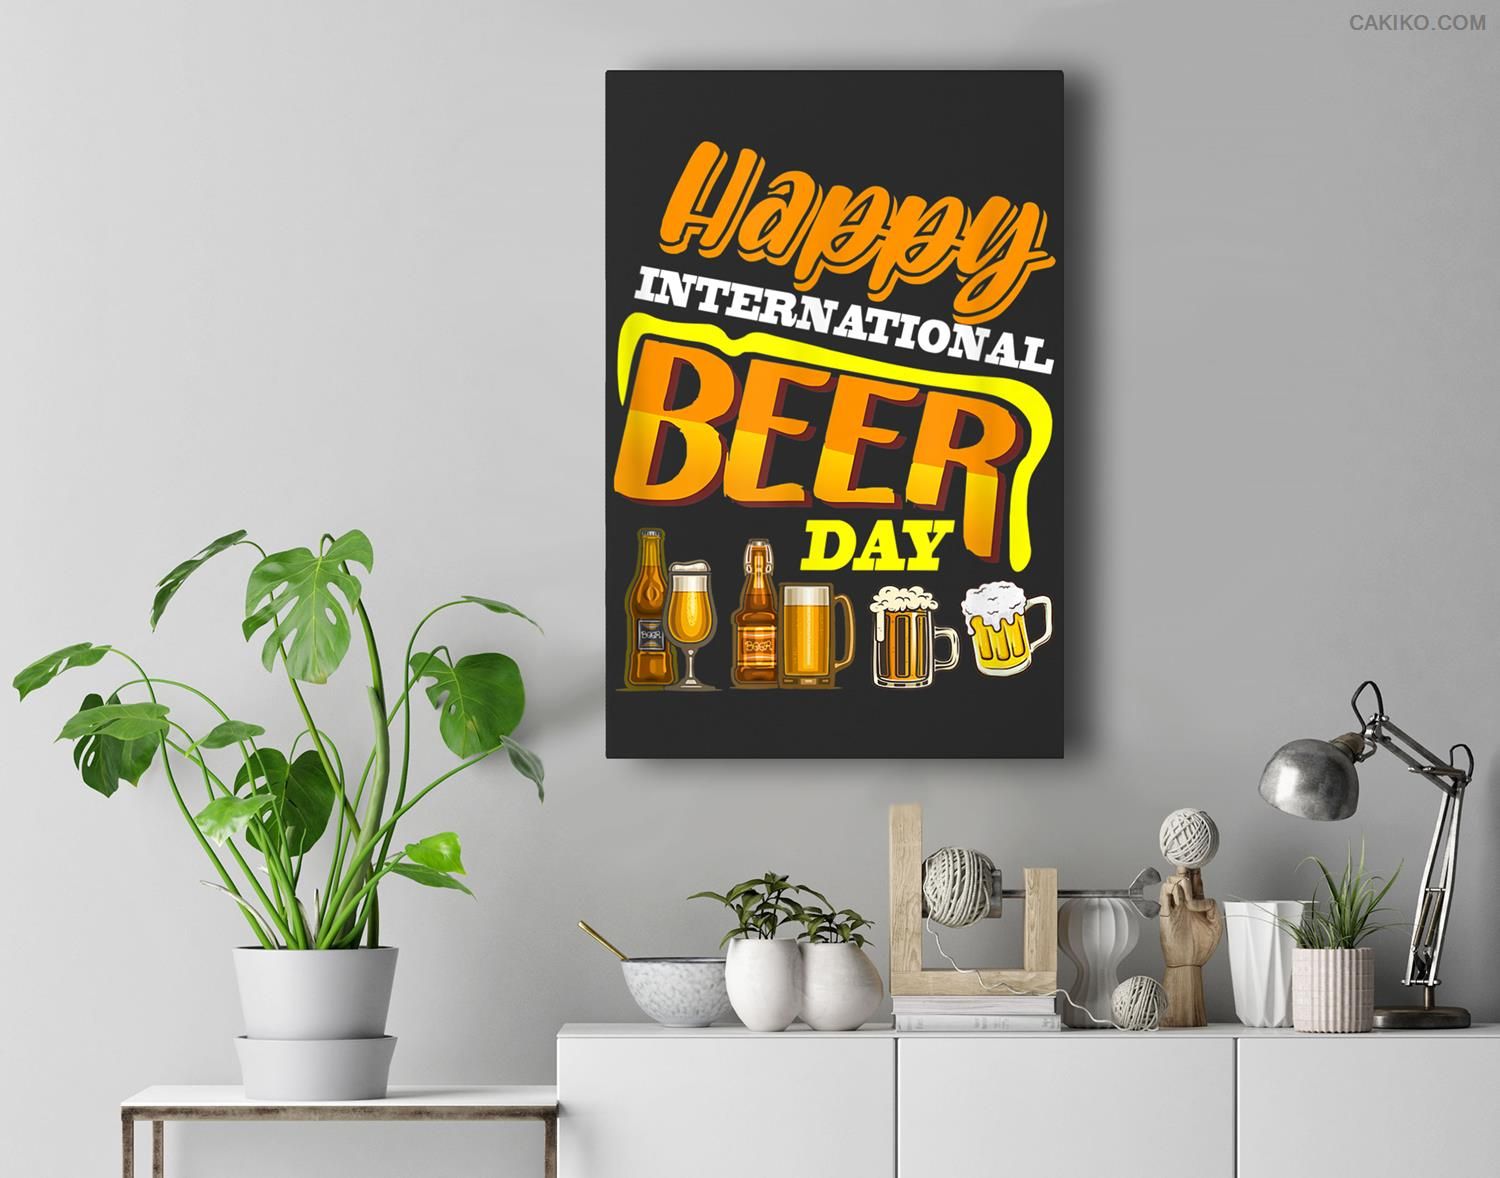 Happy International Beer Day – Funny Beer Day Premium Wall Art Canvas Decor